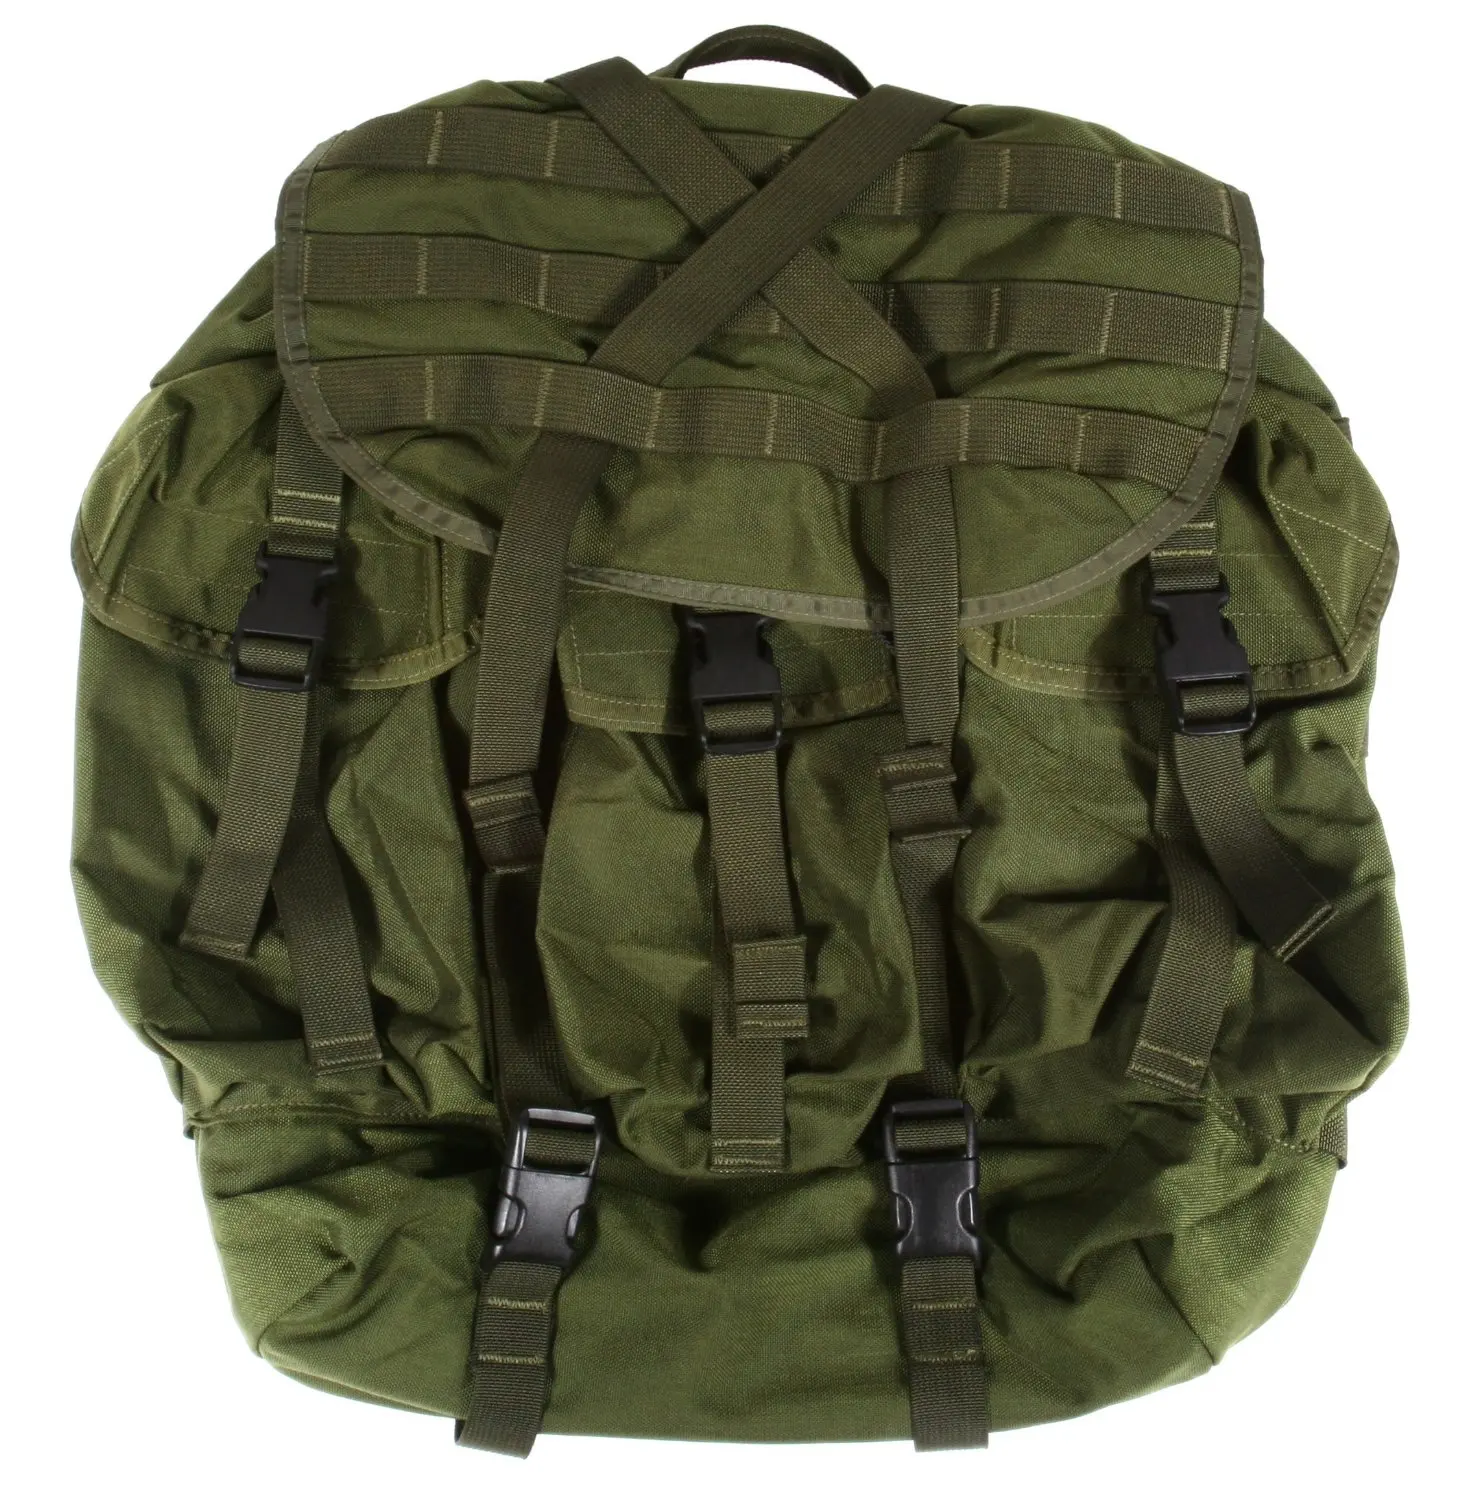 How To Pack A Ruck